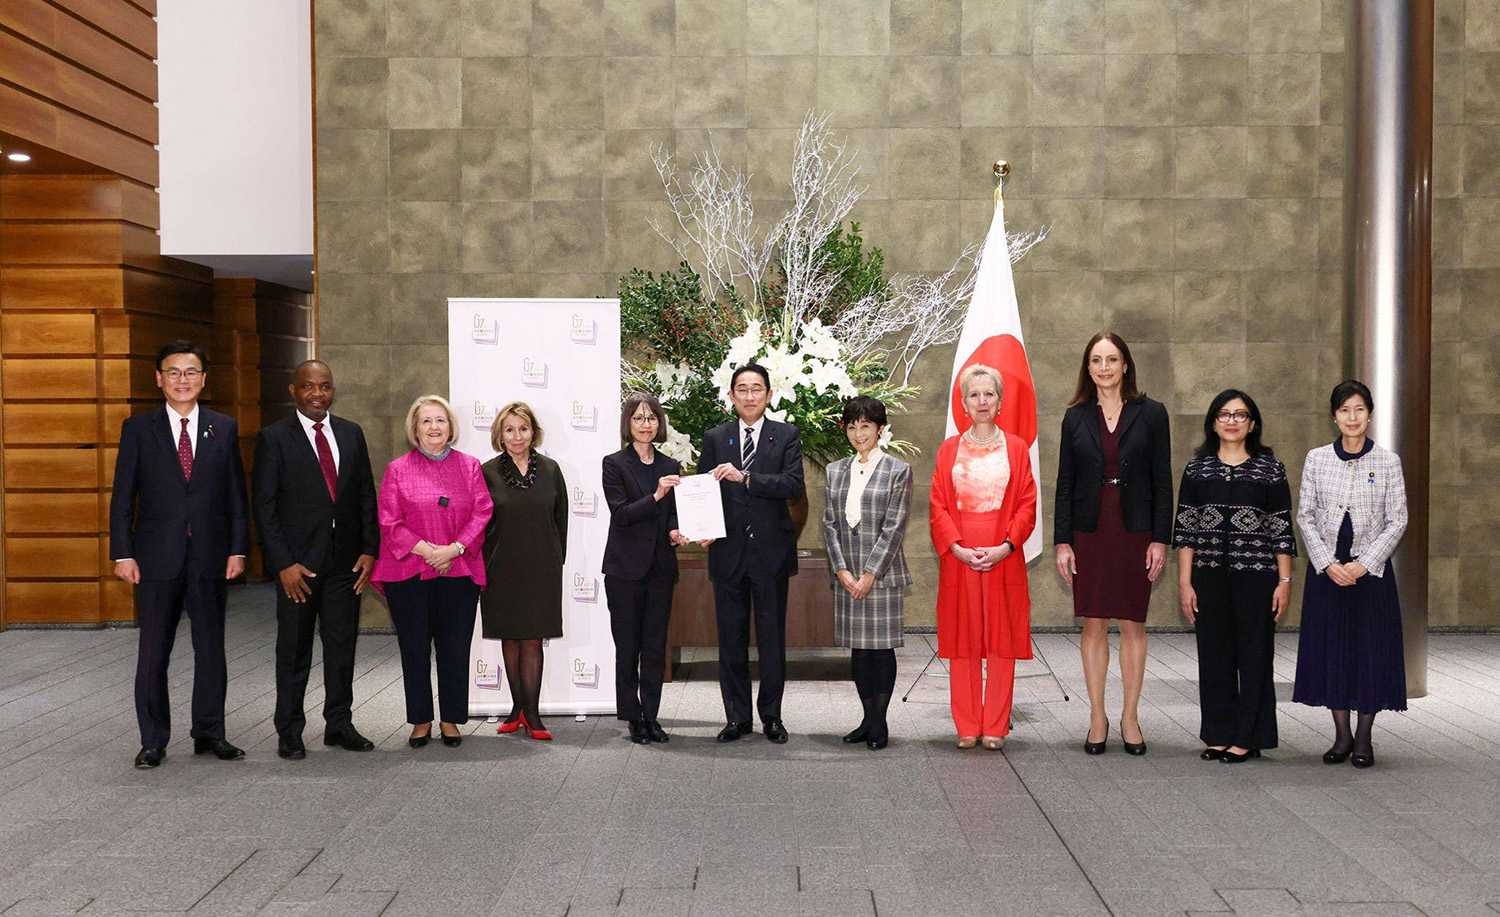 Caroline has presented recommendations on gender equality to the Japanese Prime Minister